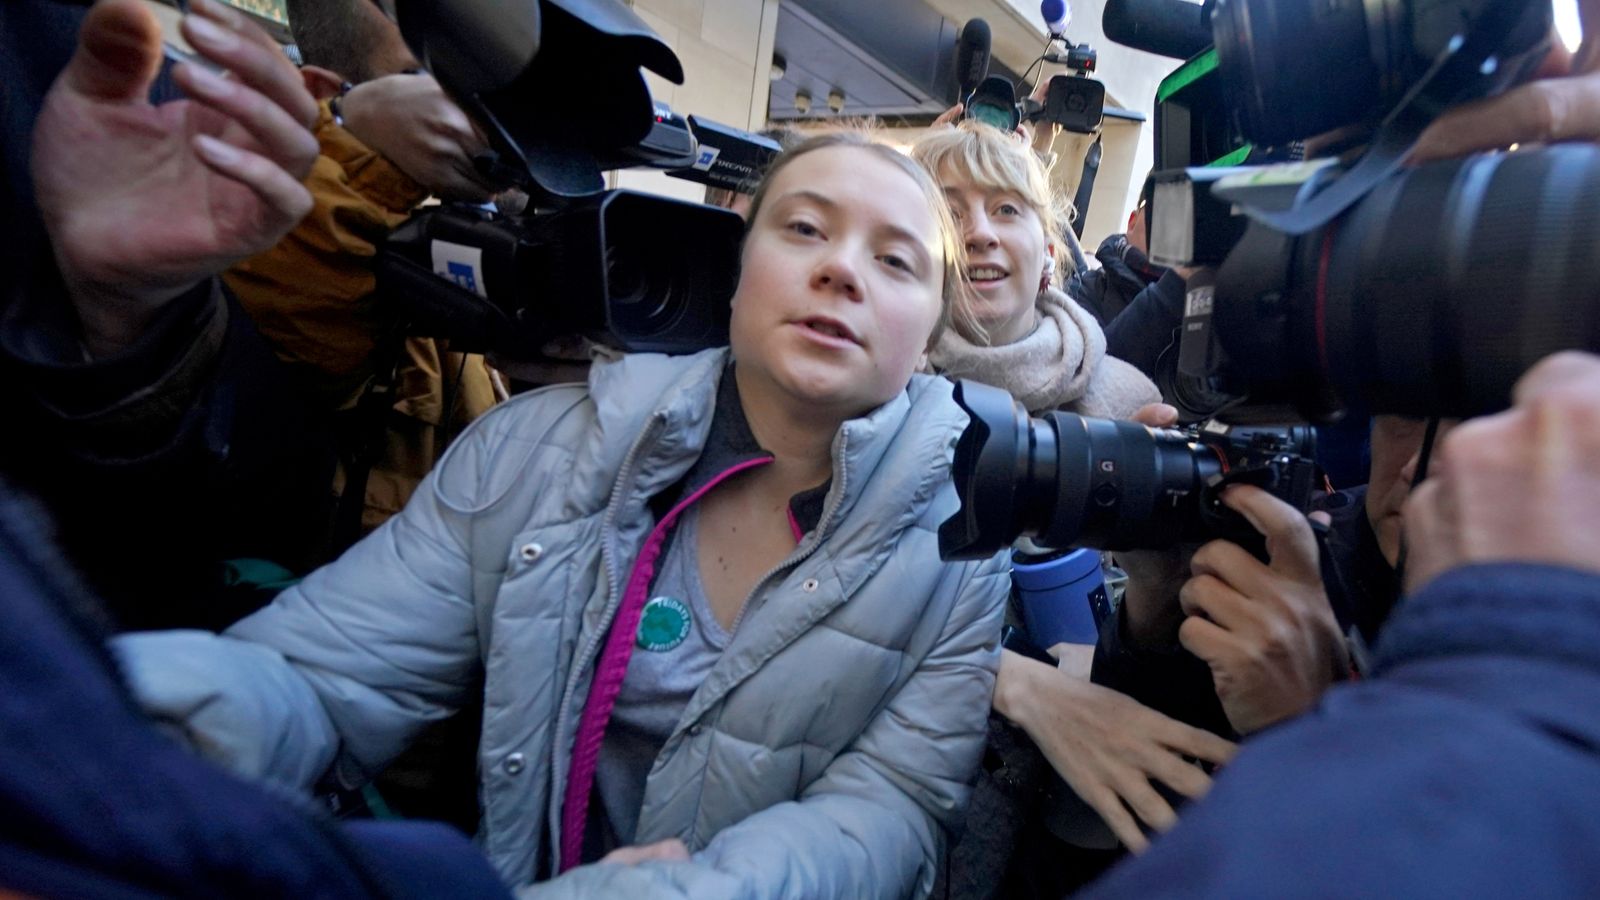 Greta Thunberg pleads not guilty as she appears in London court charged with public order offence